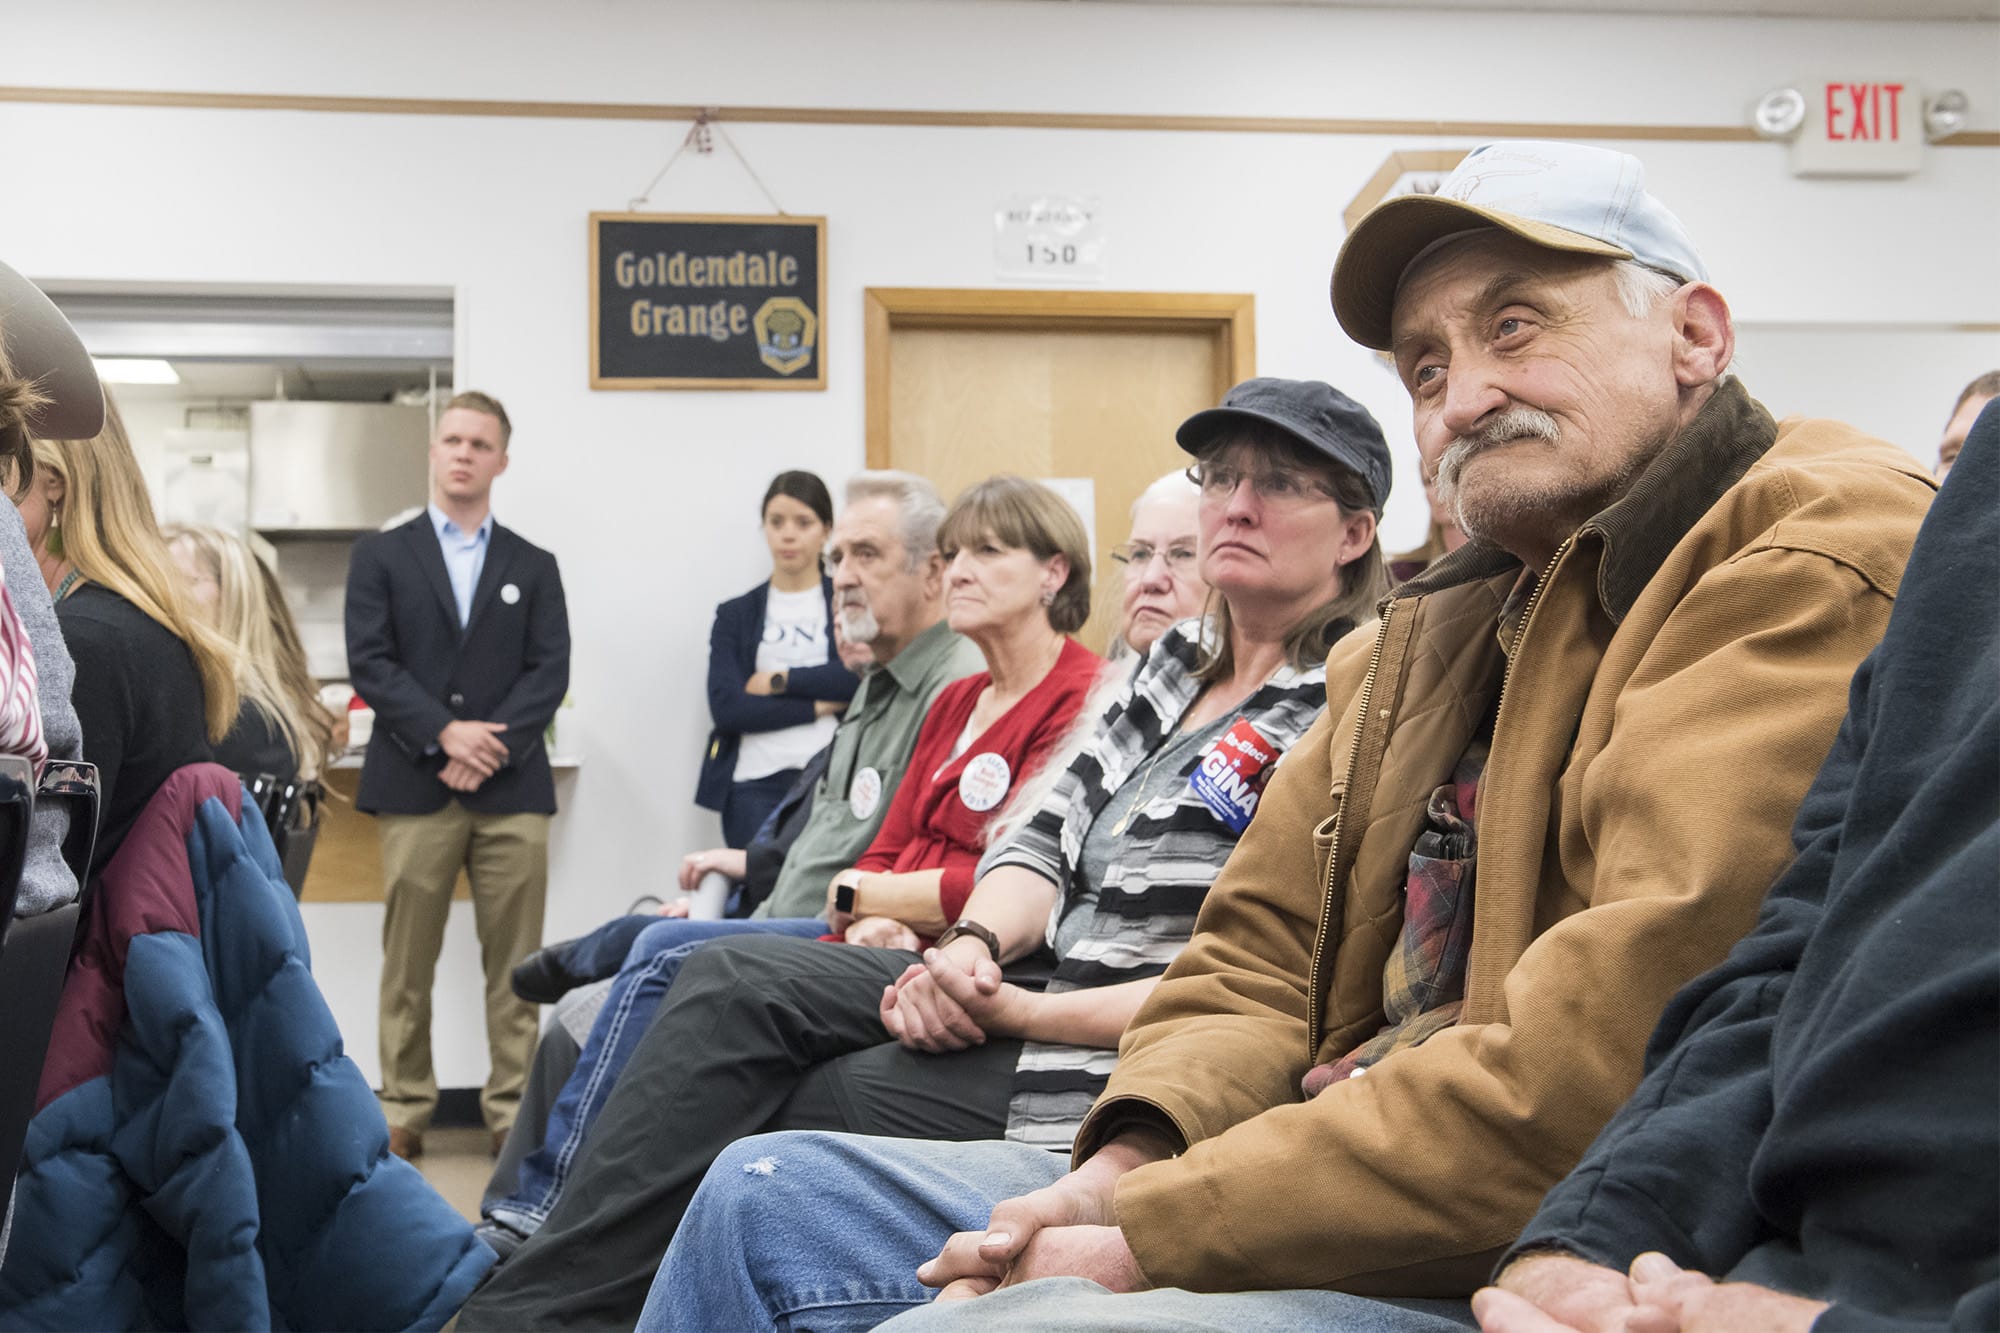 Audience members at the Goldendale Grange Hall candidate forum listen to Democratic candidate Carolyn Long and Incumbent U.S. Rep. Jaime Herrera Beutler, R-Battle Ground, speak on Wednesday night, Oct. 17, 2018.